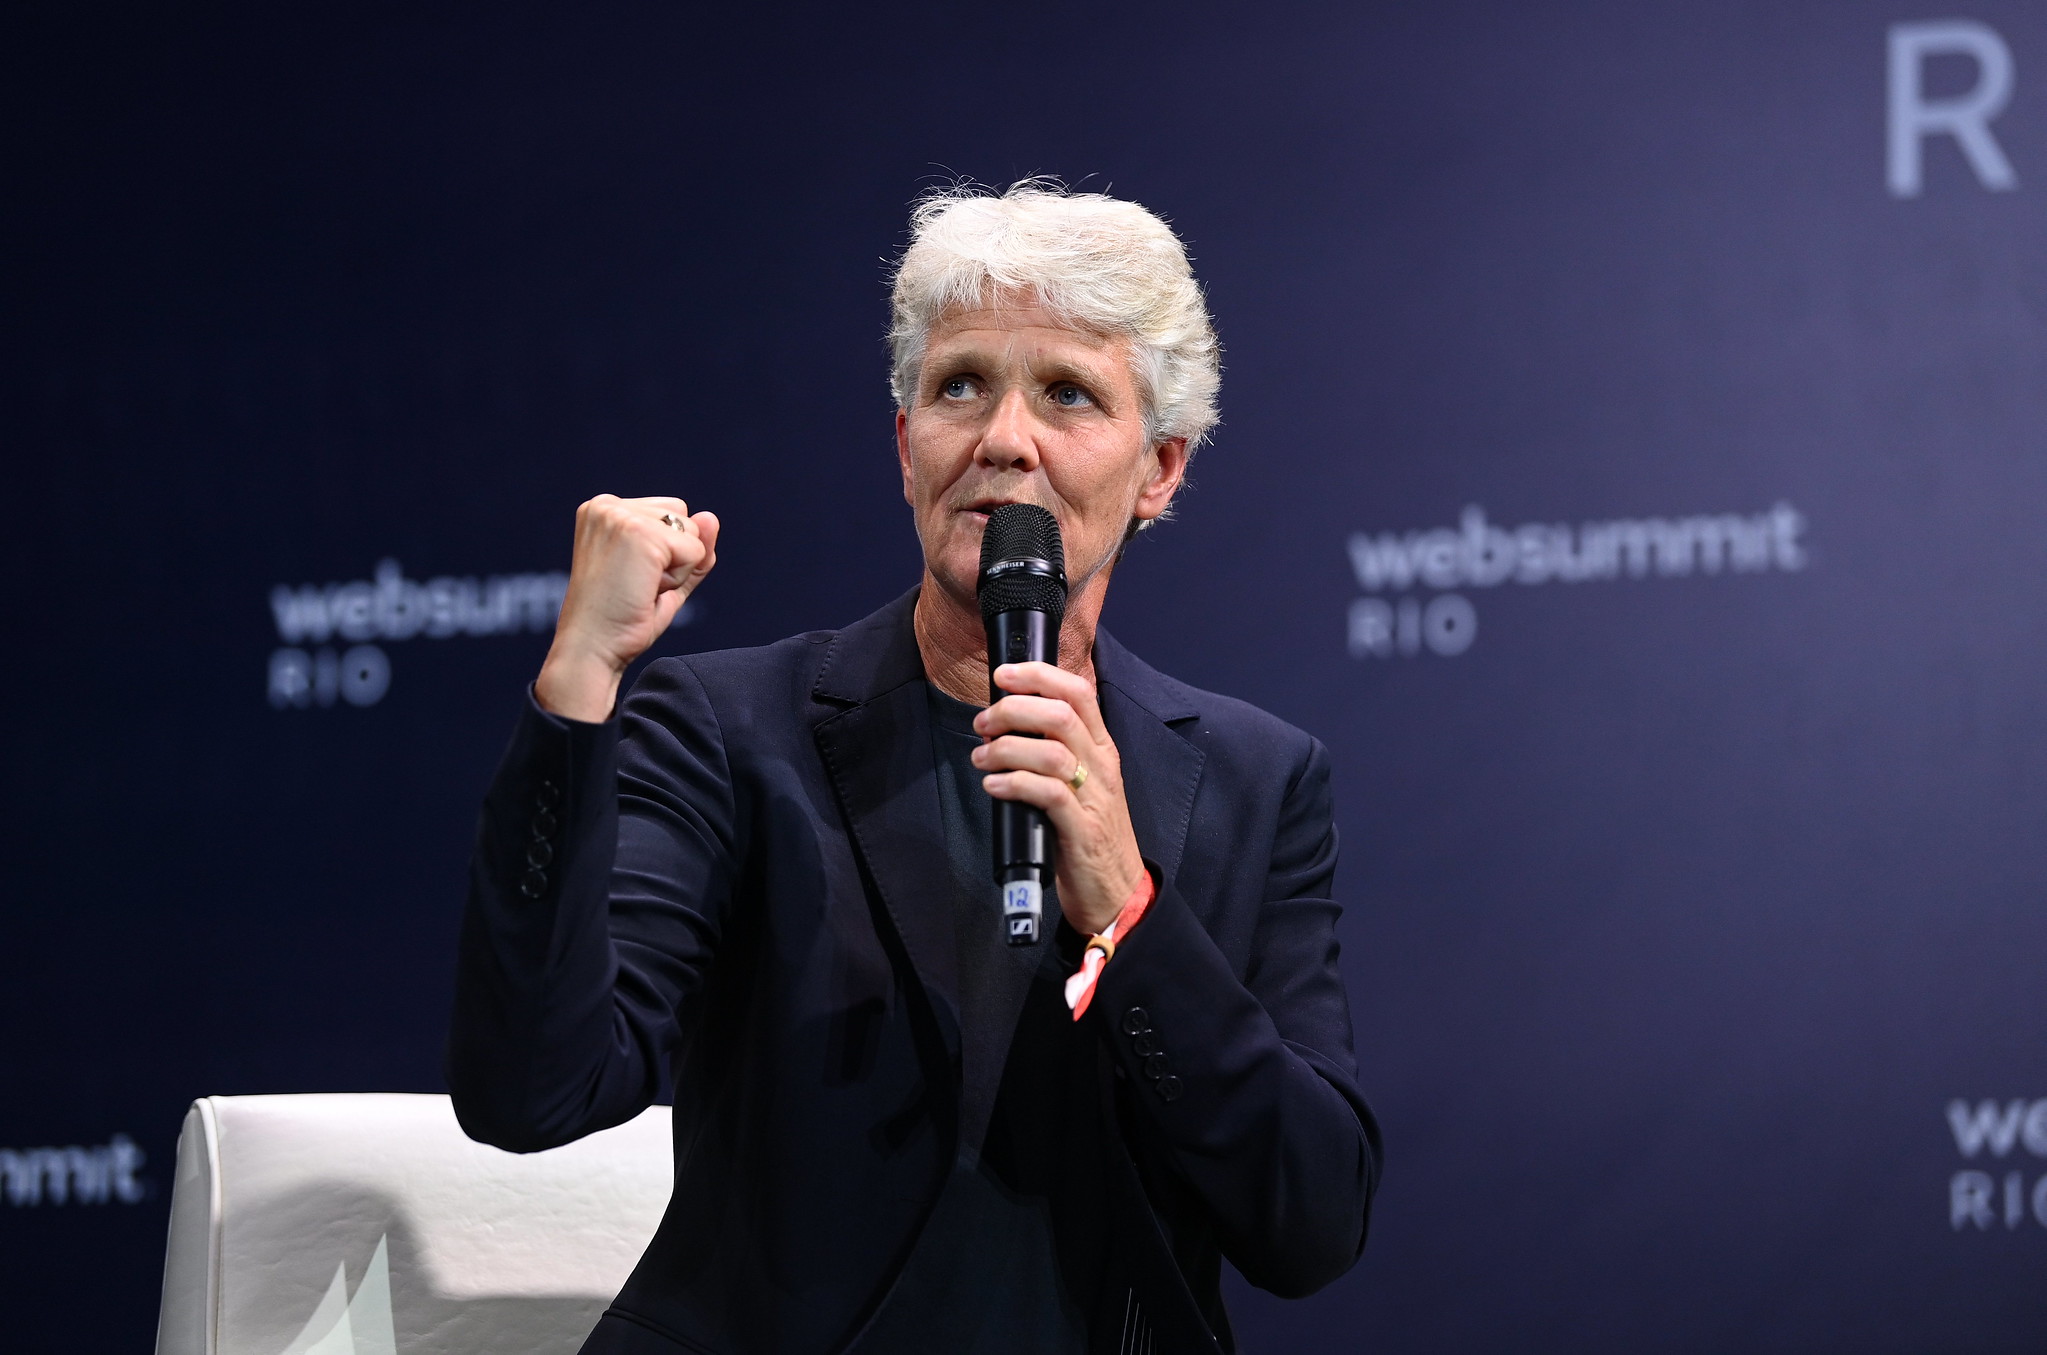 Photograph of a person (Pia Sundhage, former head coach of Brazil women's national team) speaking on stage at Web Summit Rio. The person is holding a microphone and has their fist in the air. They are sitting on a chair.